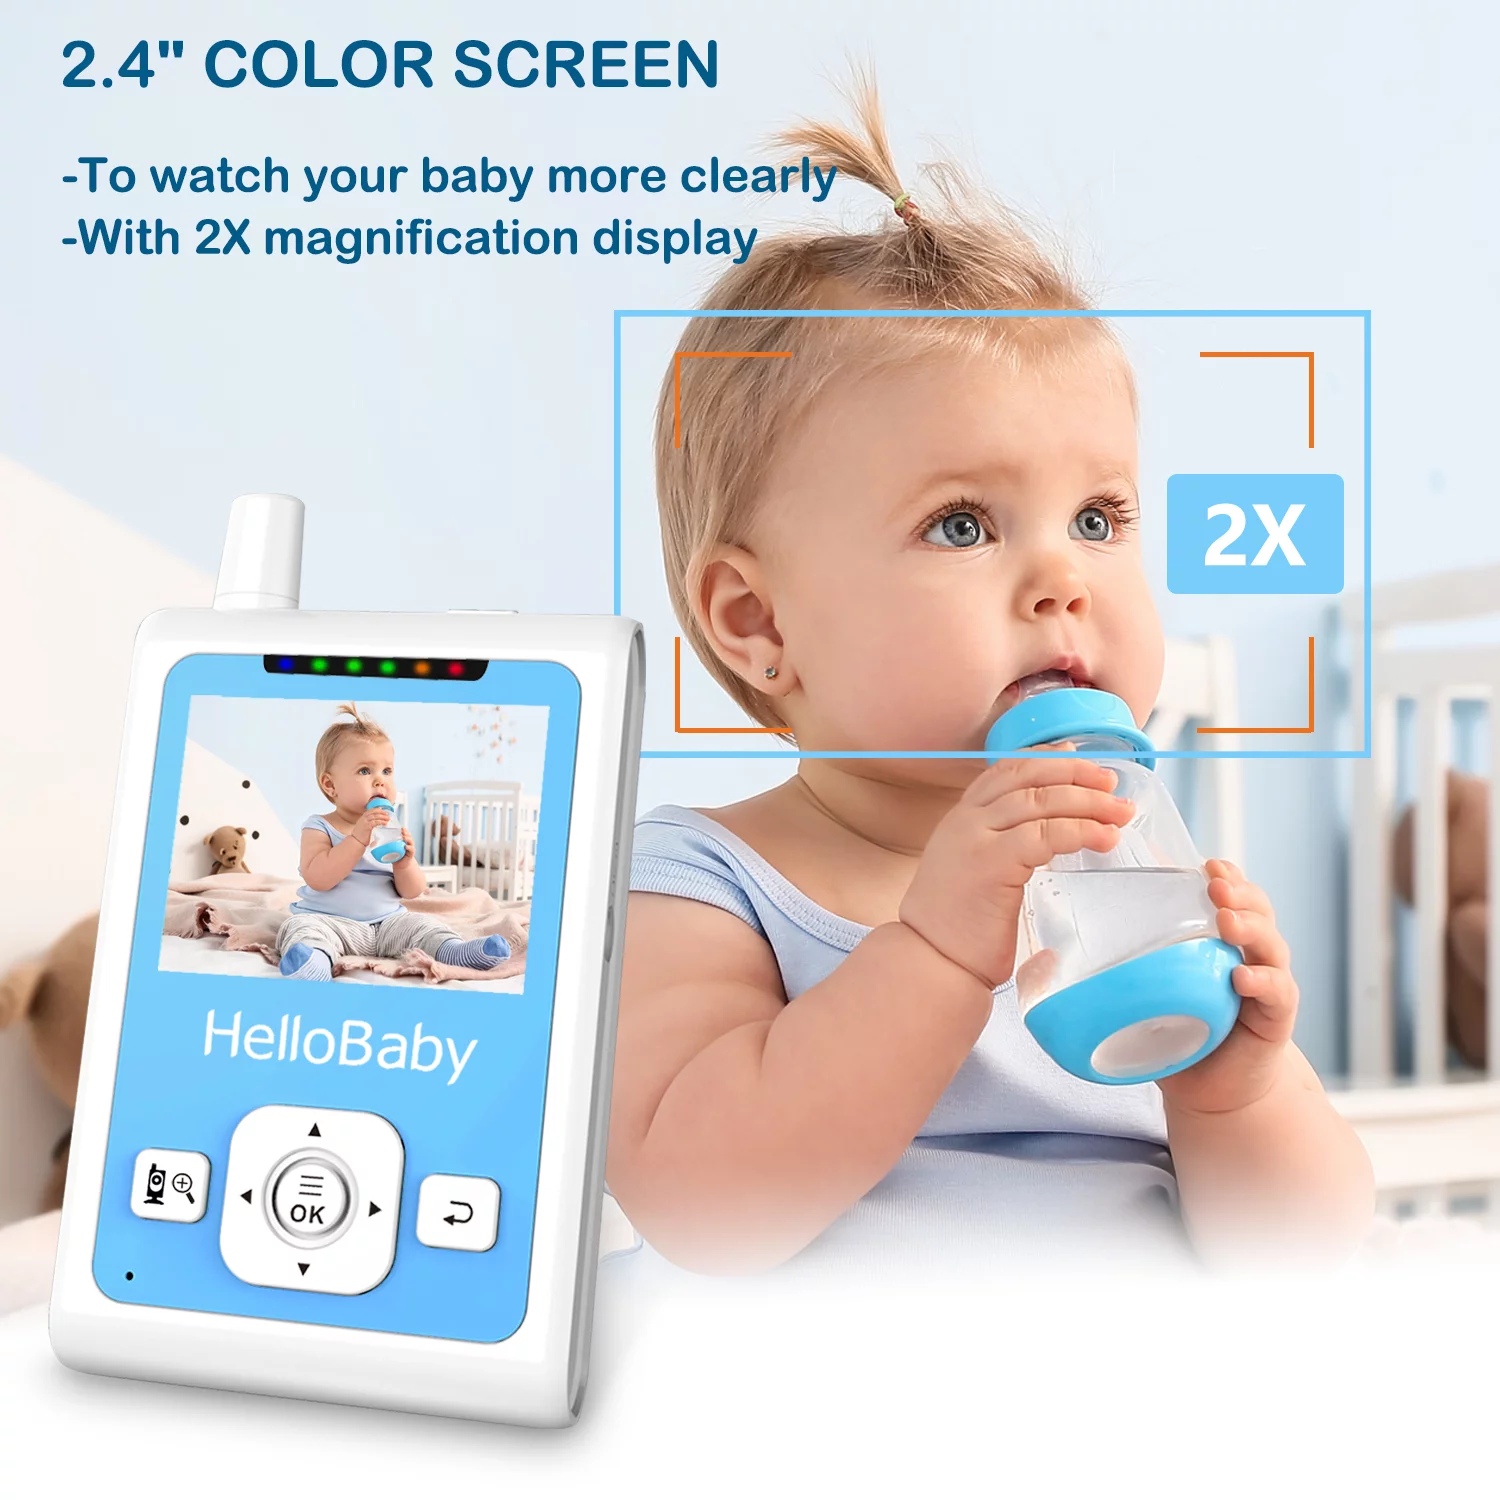 hellobaby best baby monitor - Baby Monitor HelloBaby Video Baby Monitor with 2.4 inch Screen, Night Vision, Temperature Sensor, VOX Mode, One-Way Talk, HB26  